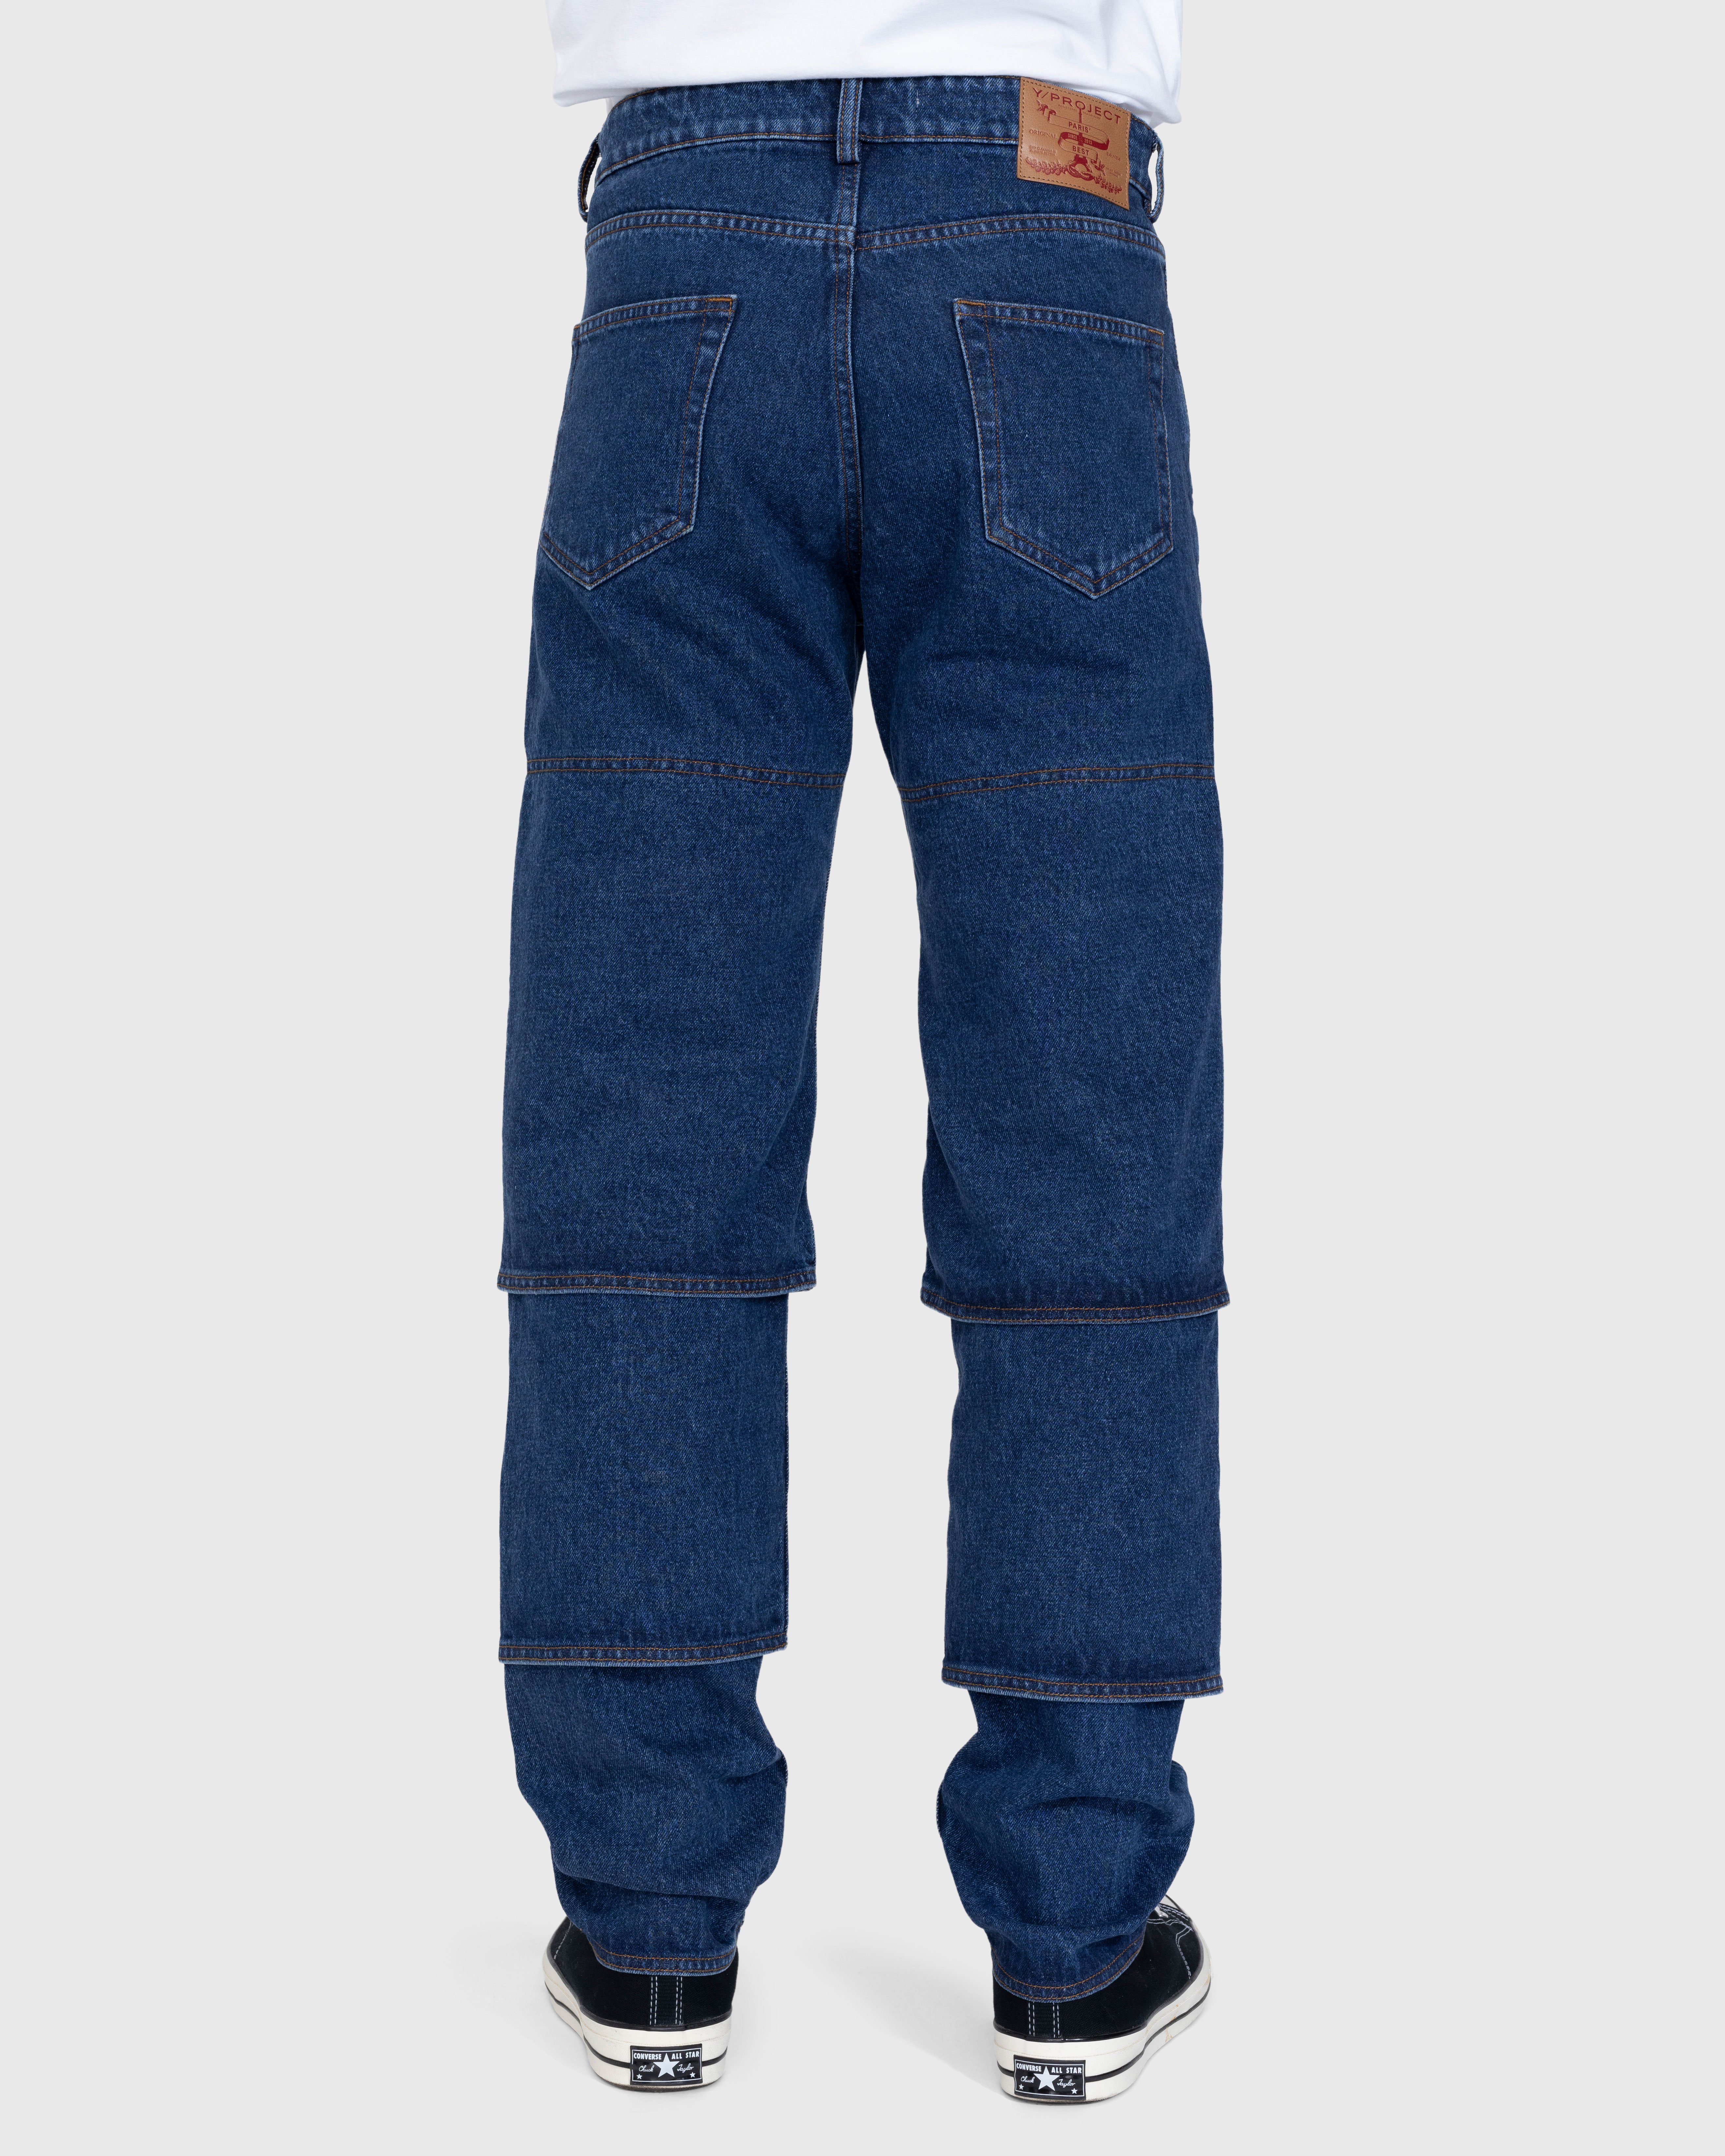 Y/Project - Classic Multi-Cuff Jeans Blue - Clothing - Blue - Image 3